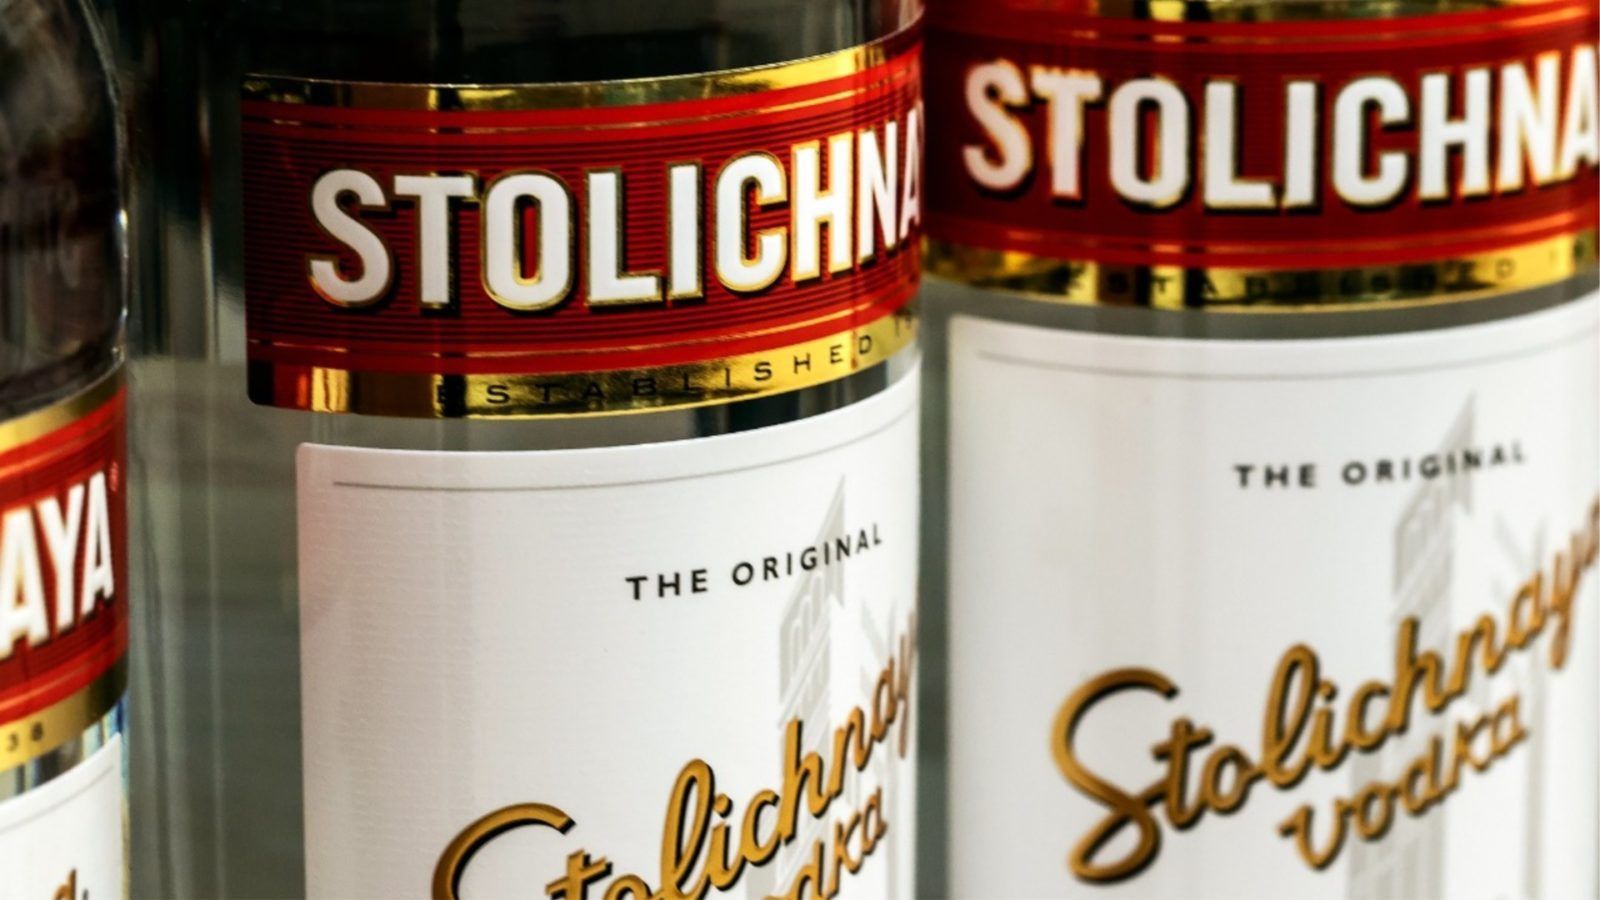 Stolichnaya vodka officially changes its name to ‘Stoli’ outside of Russia